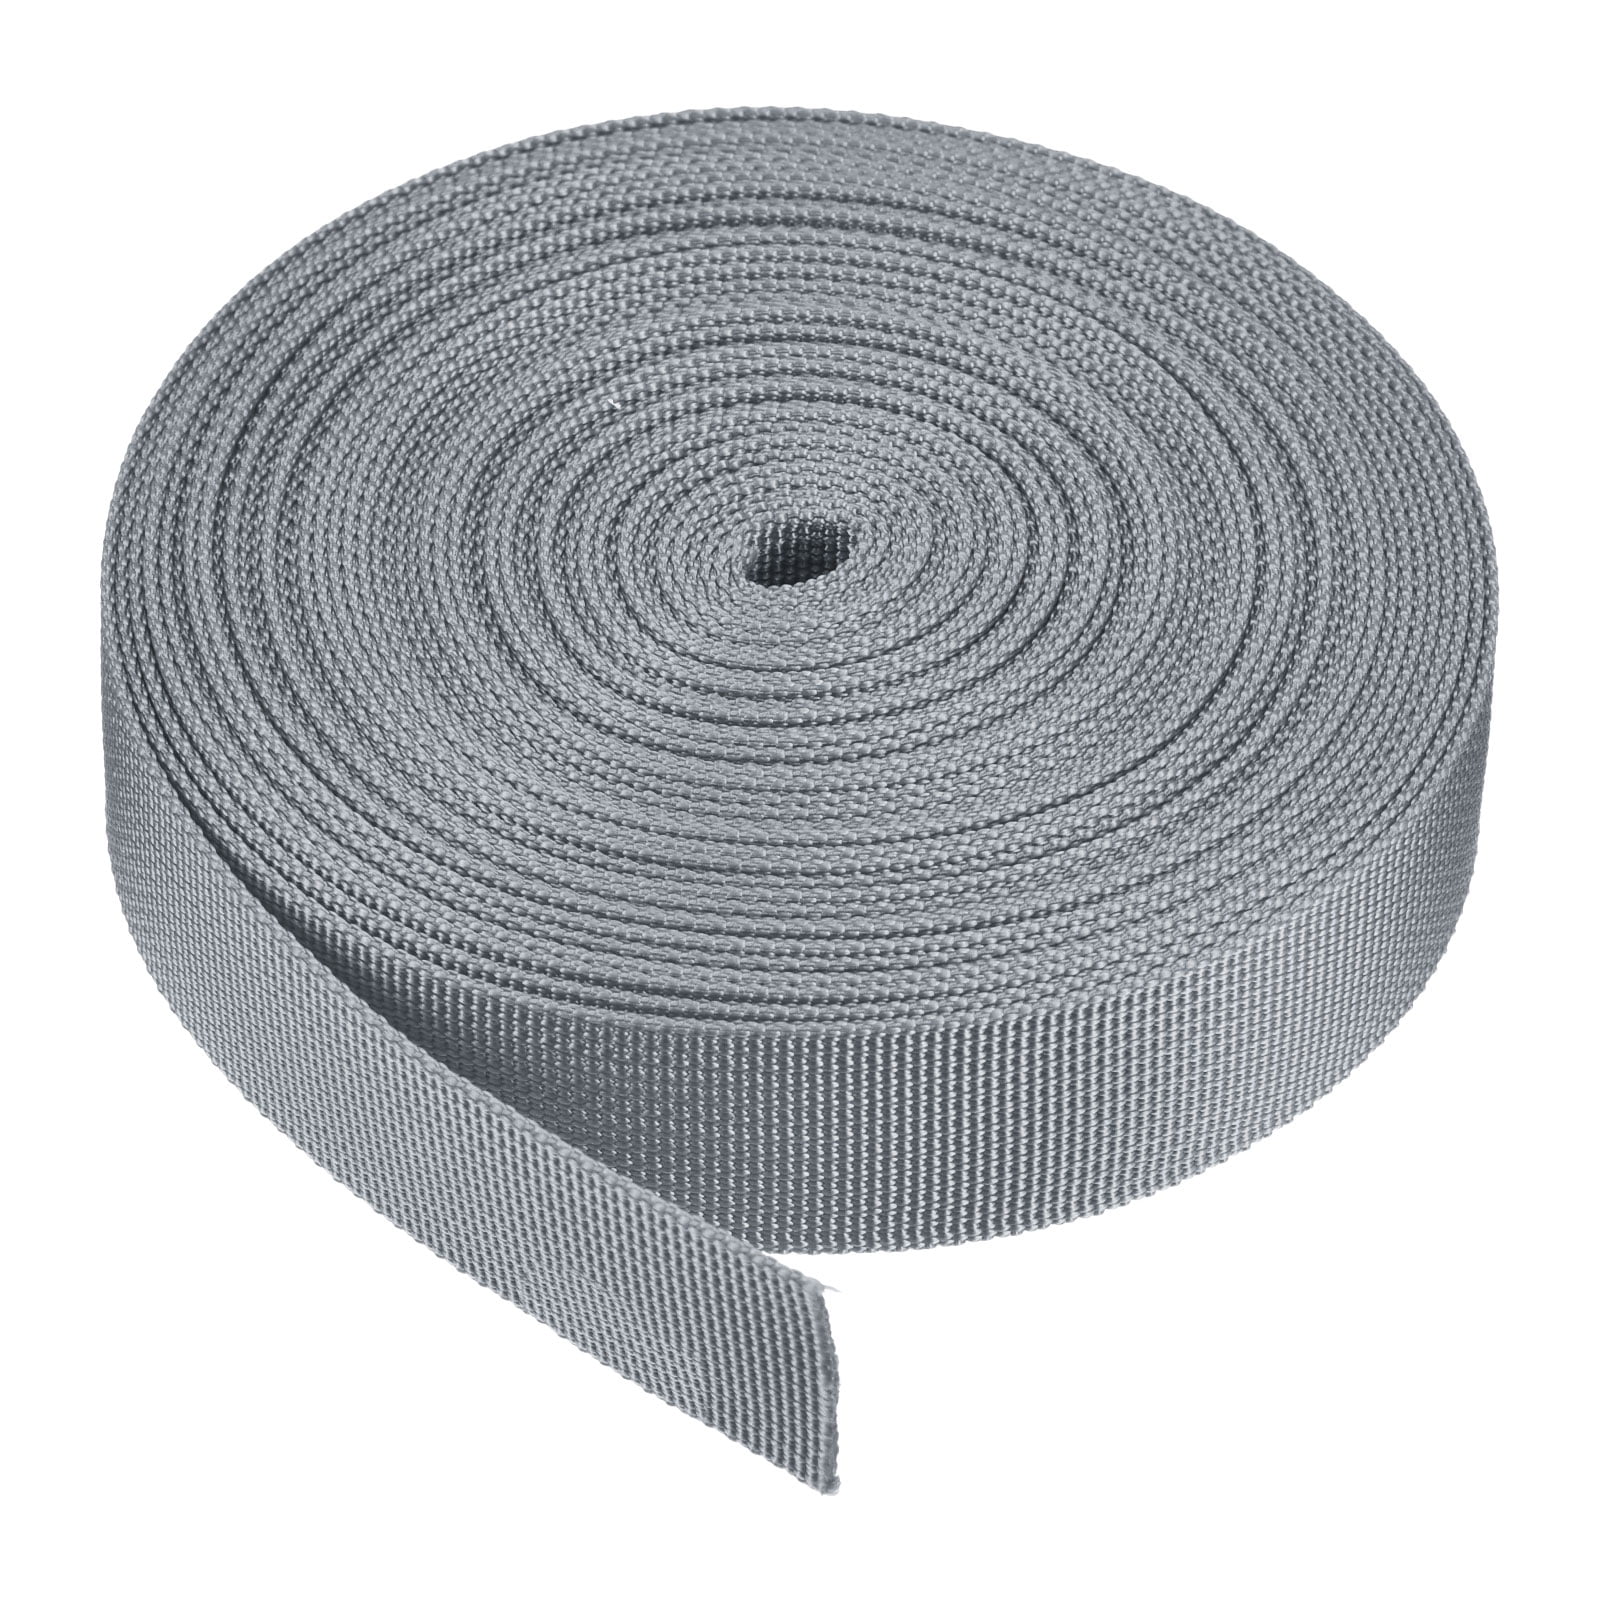 Custom Cotton Webbing 2 Inch Manufacturers and Suppliers - Free